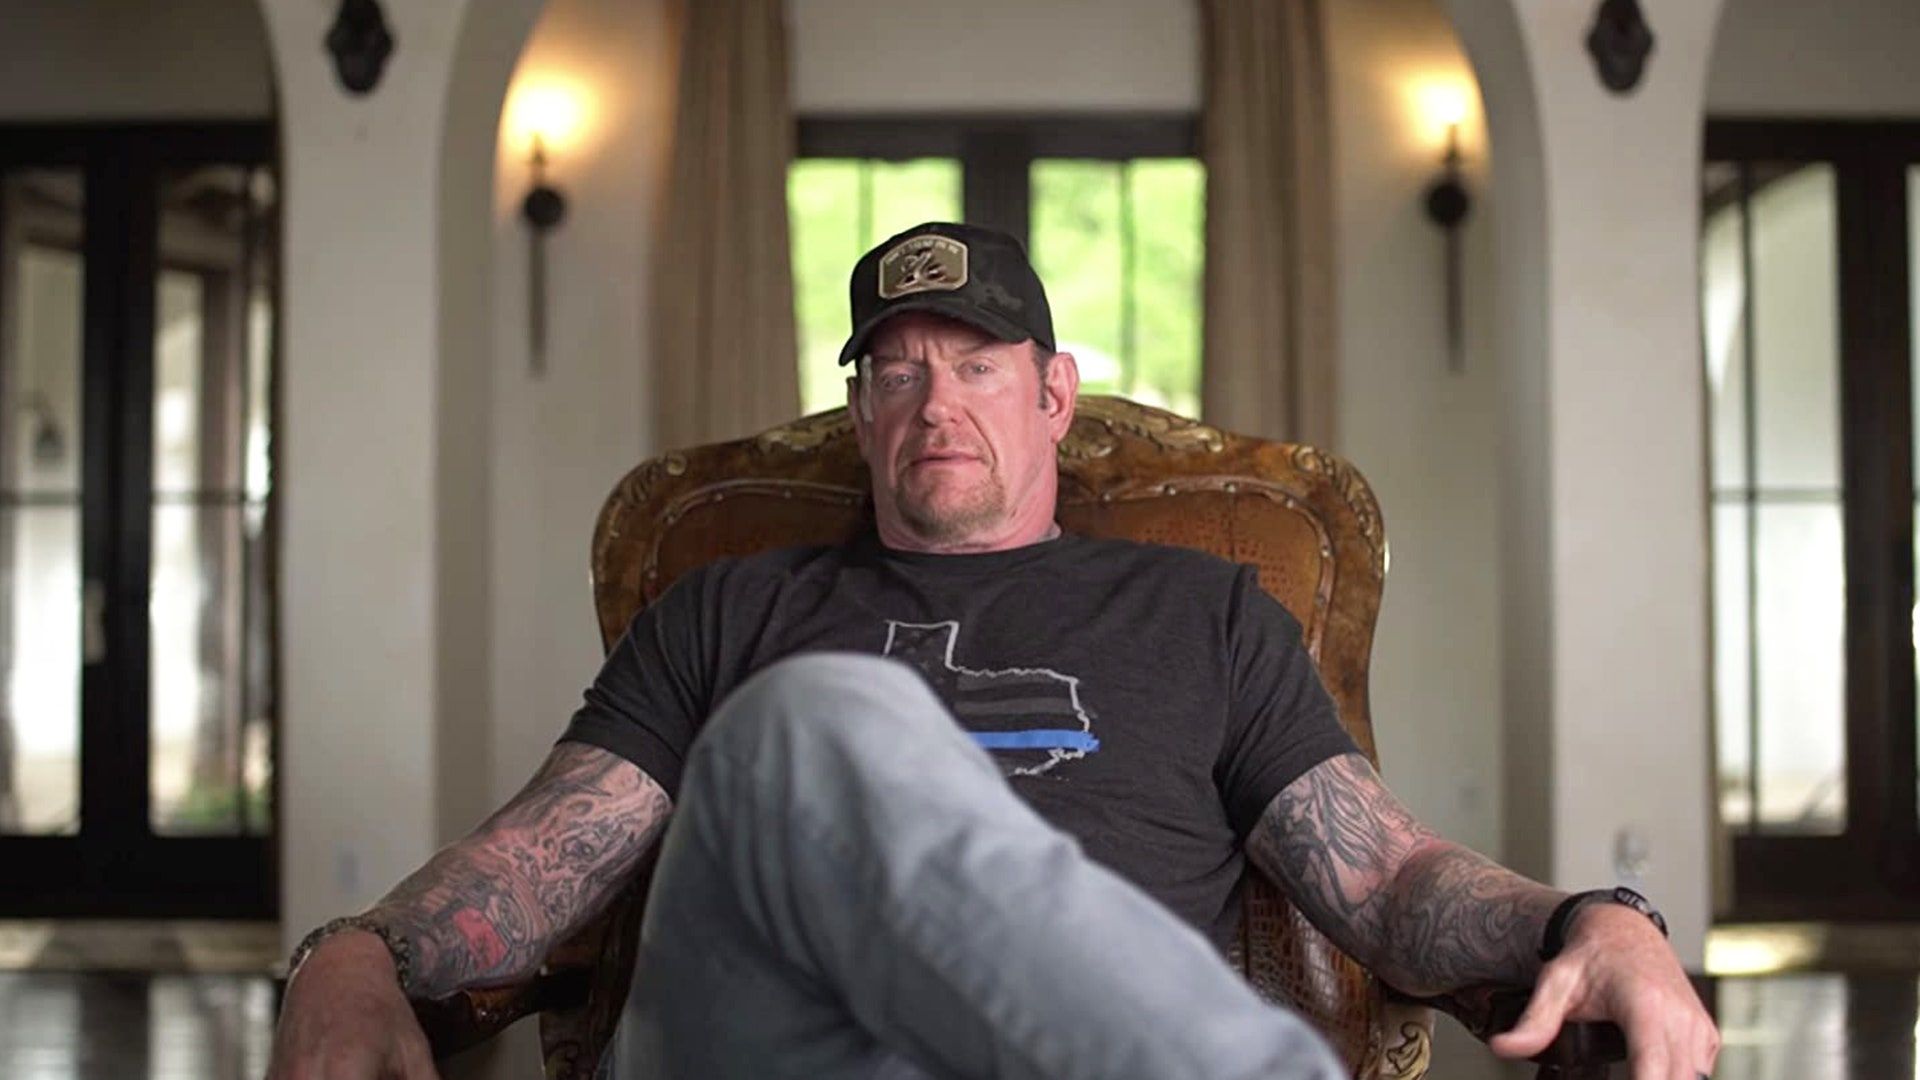 The Undertaker is thinking about death now more than ever